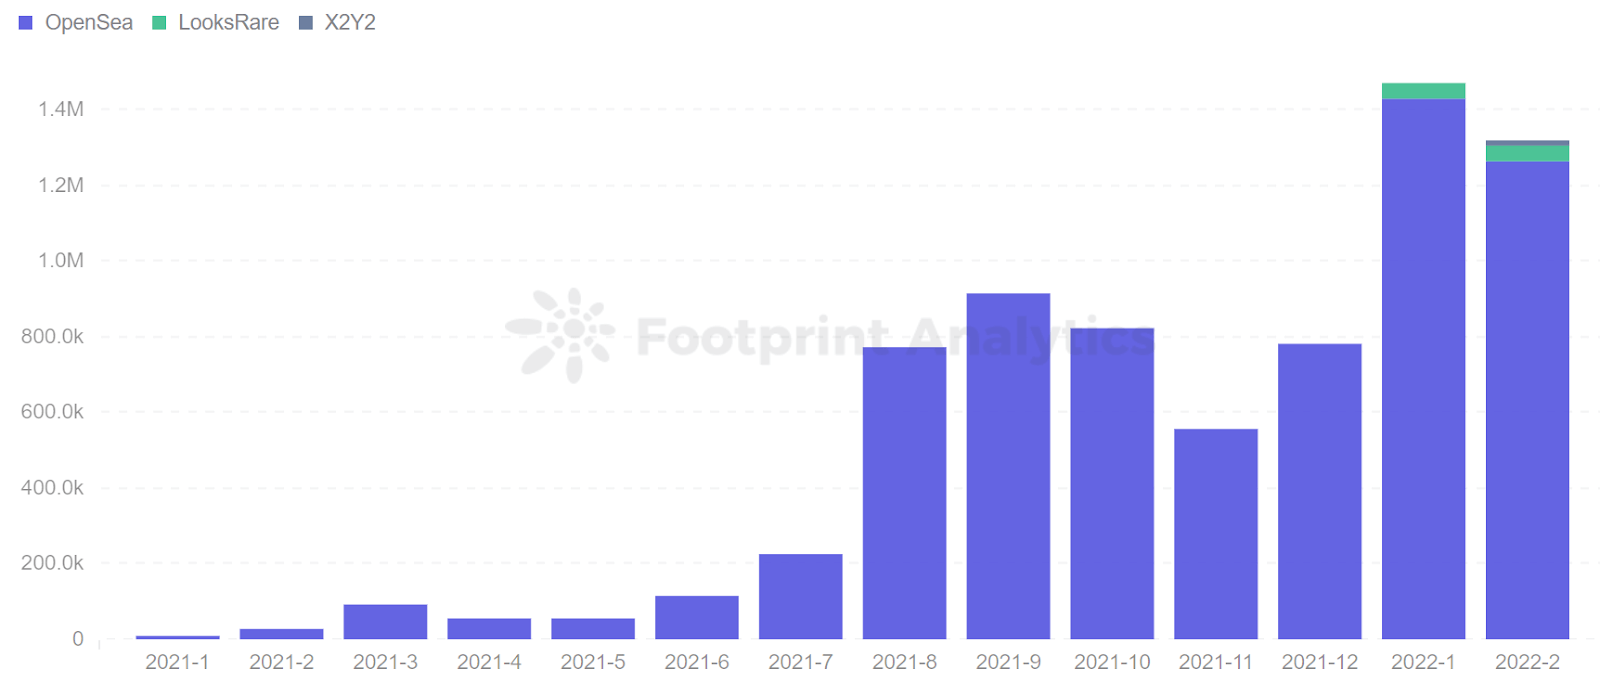 Footprint Analytics - Monthly Number of Users